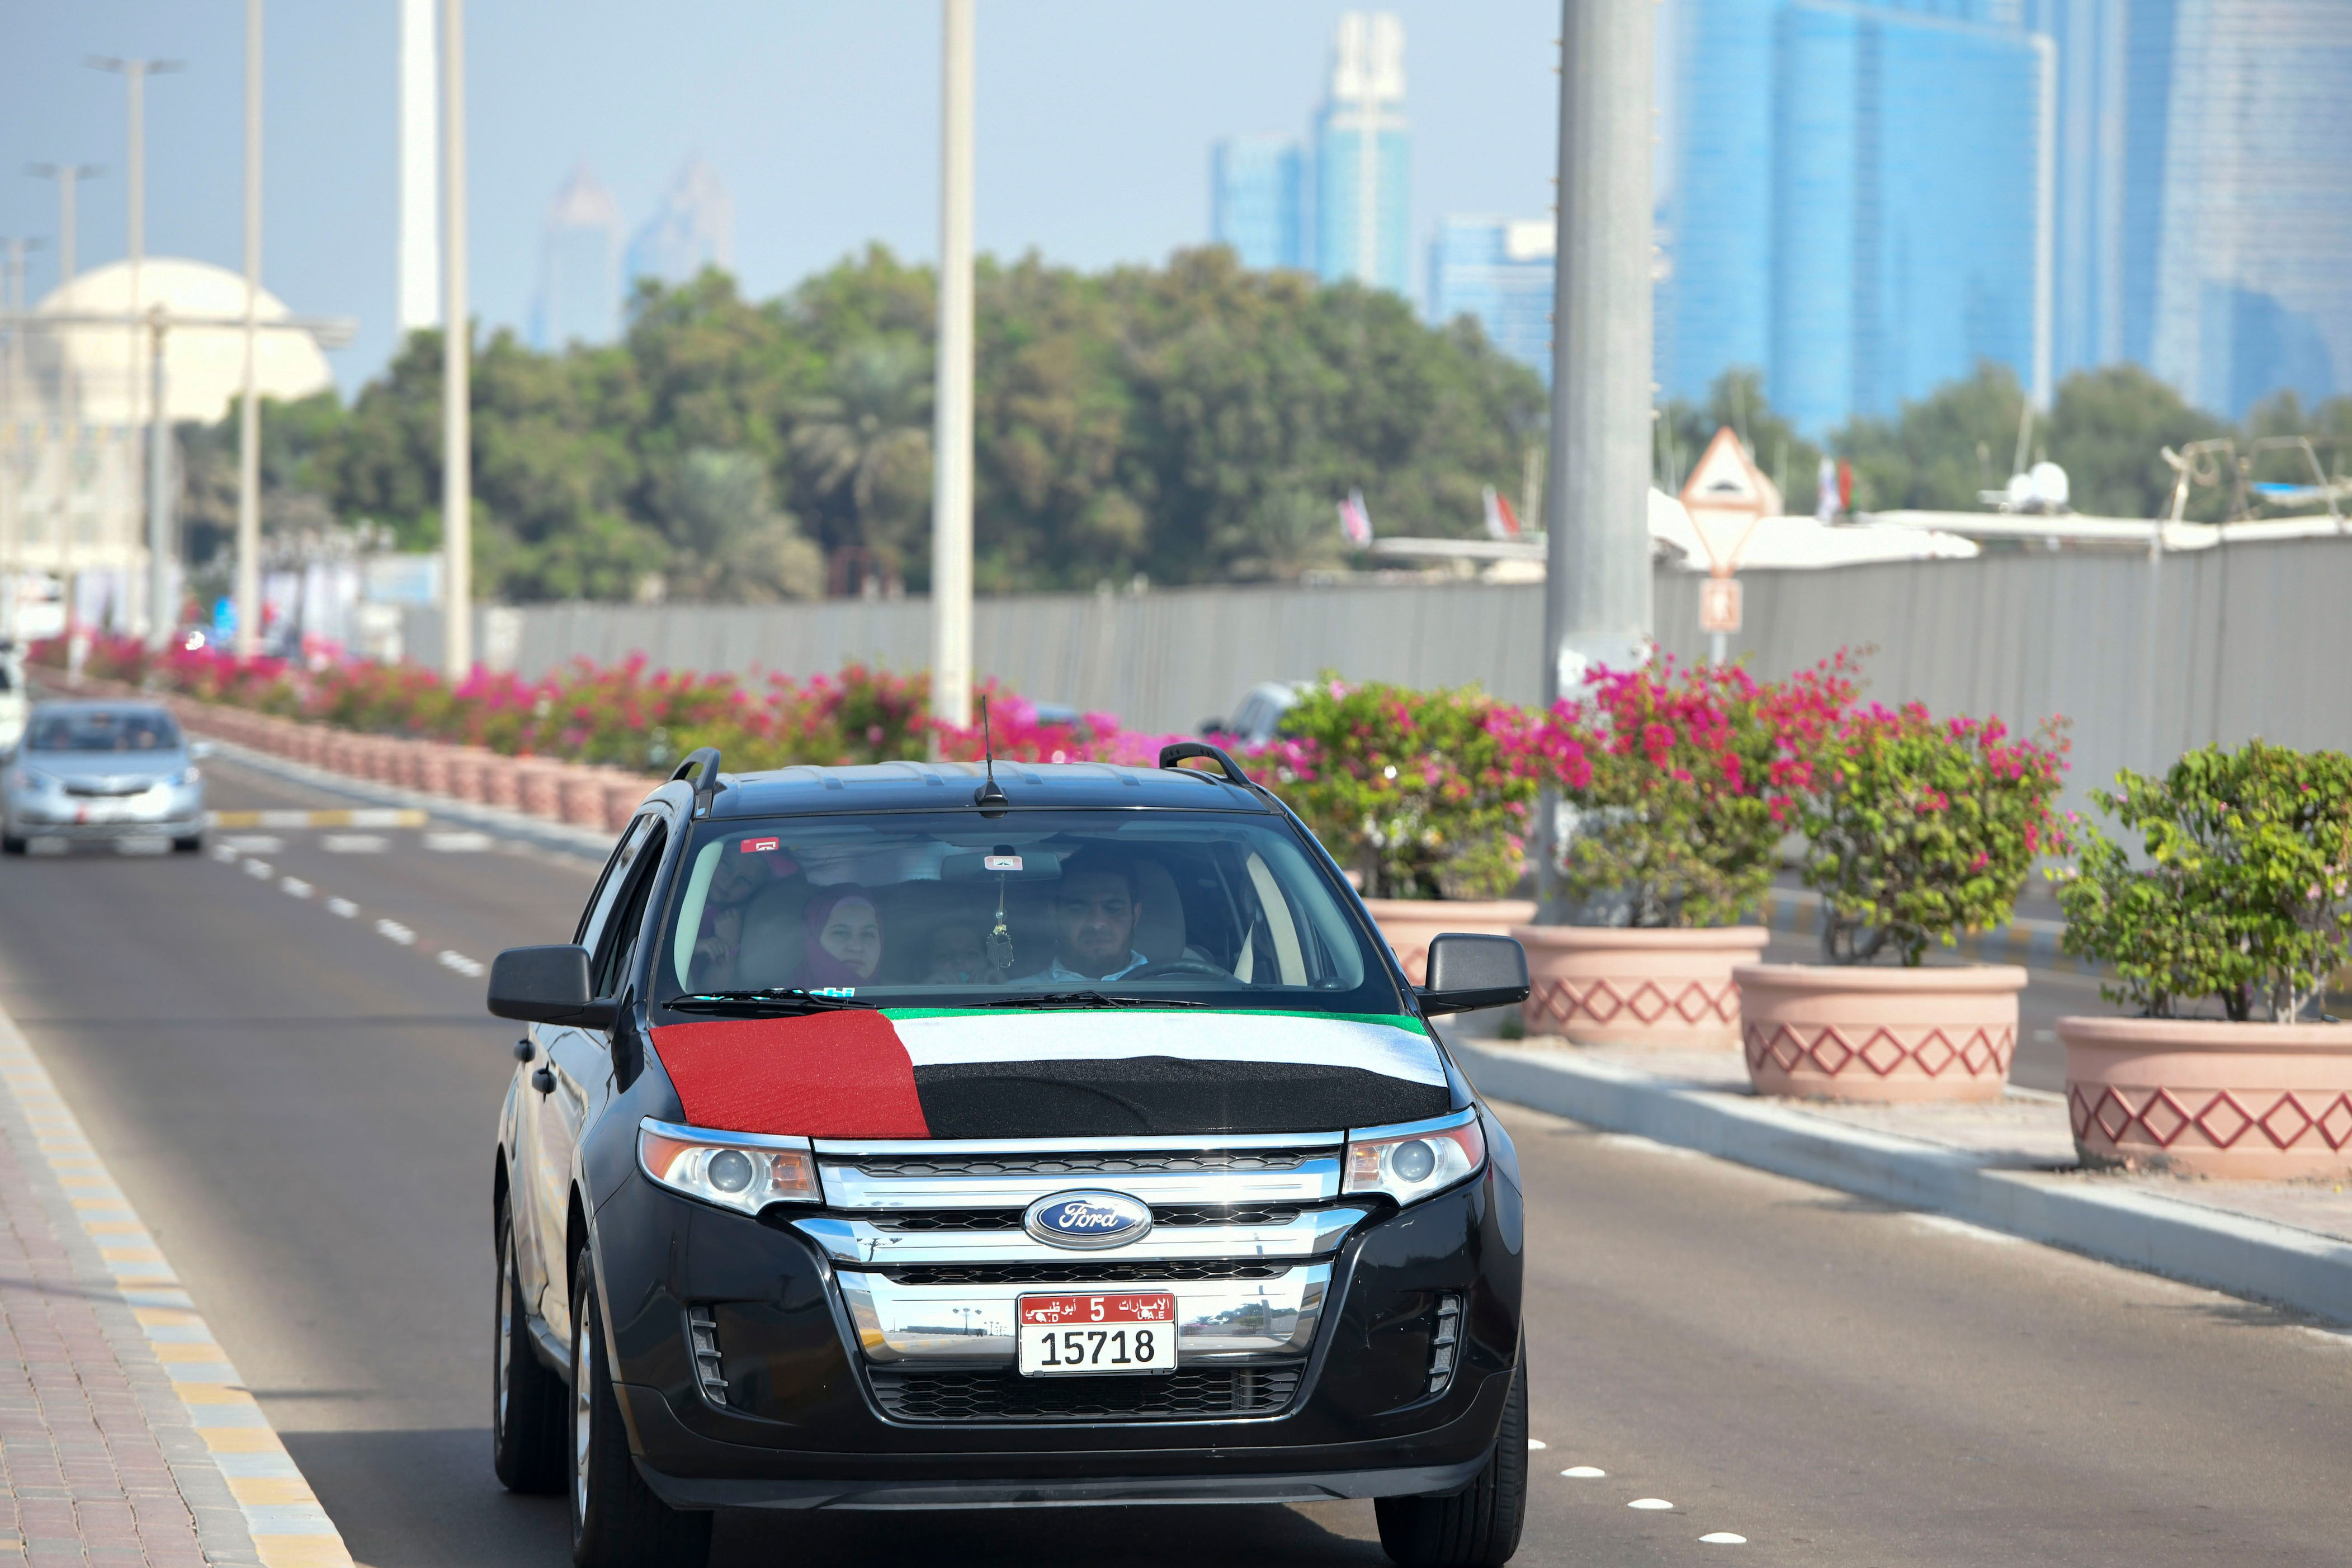 uae national day holiday announced for public sector